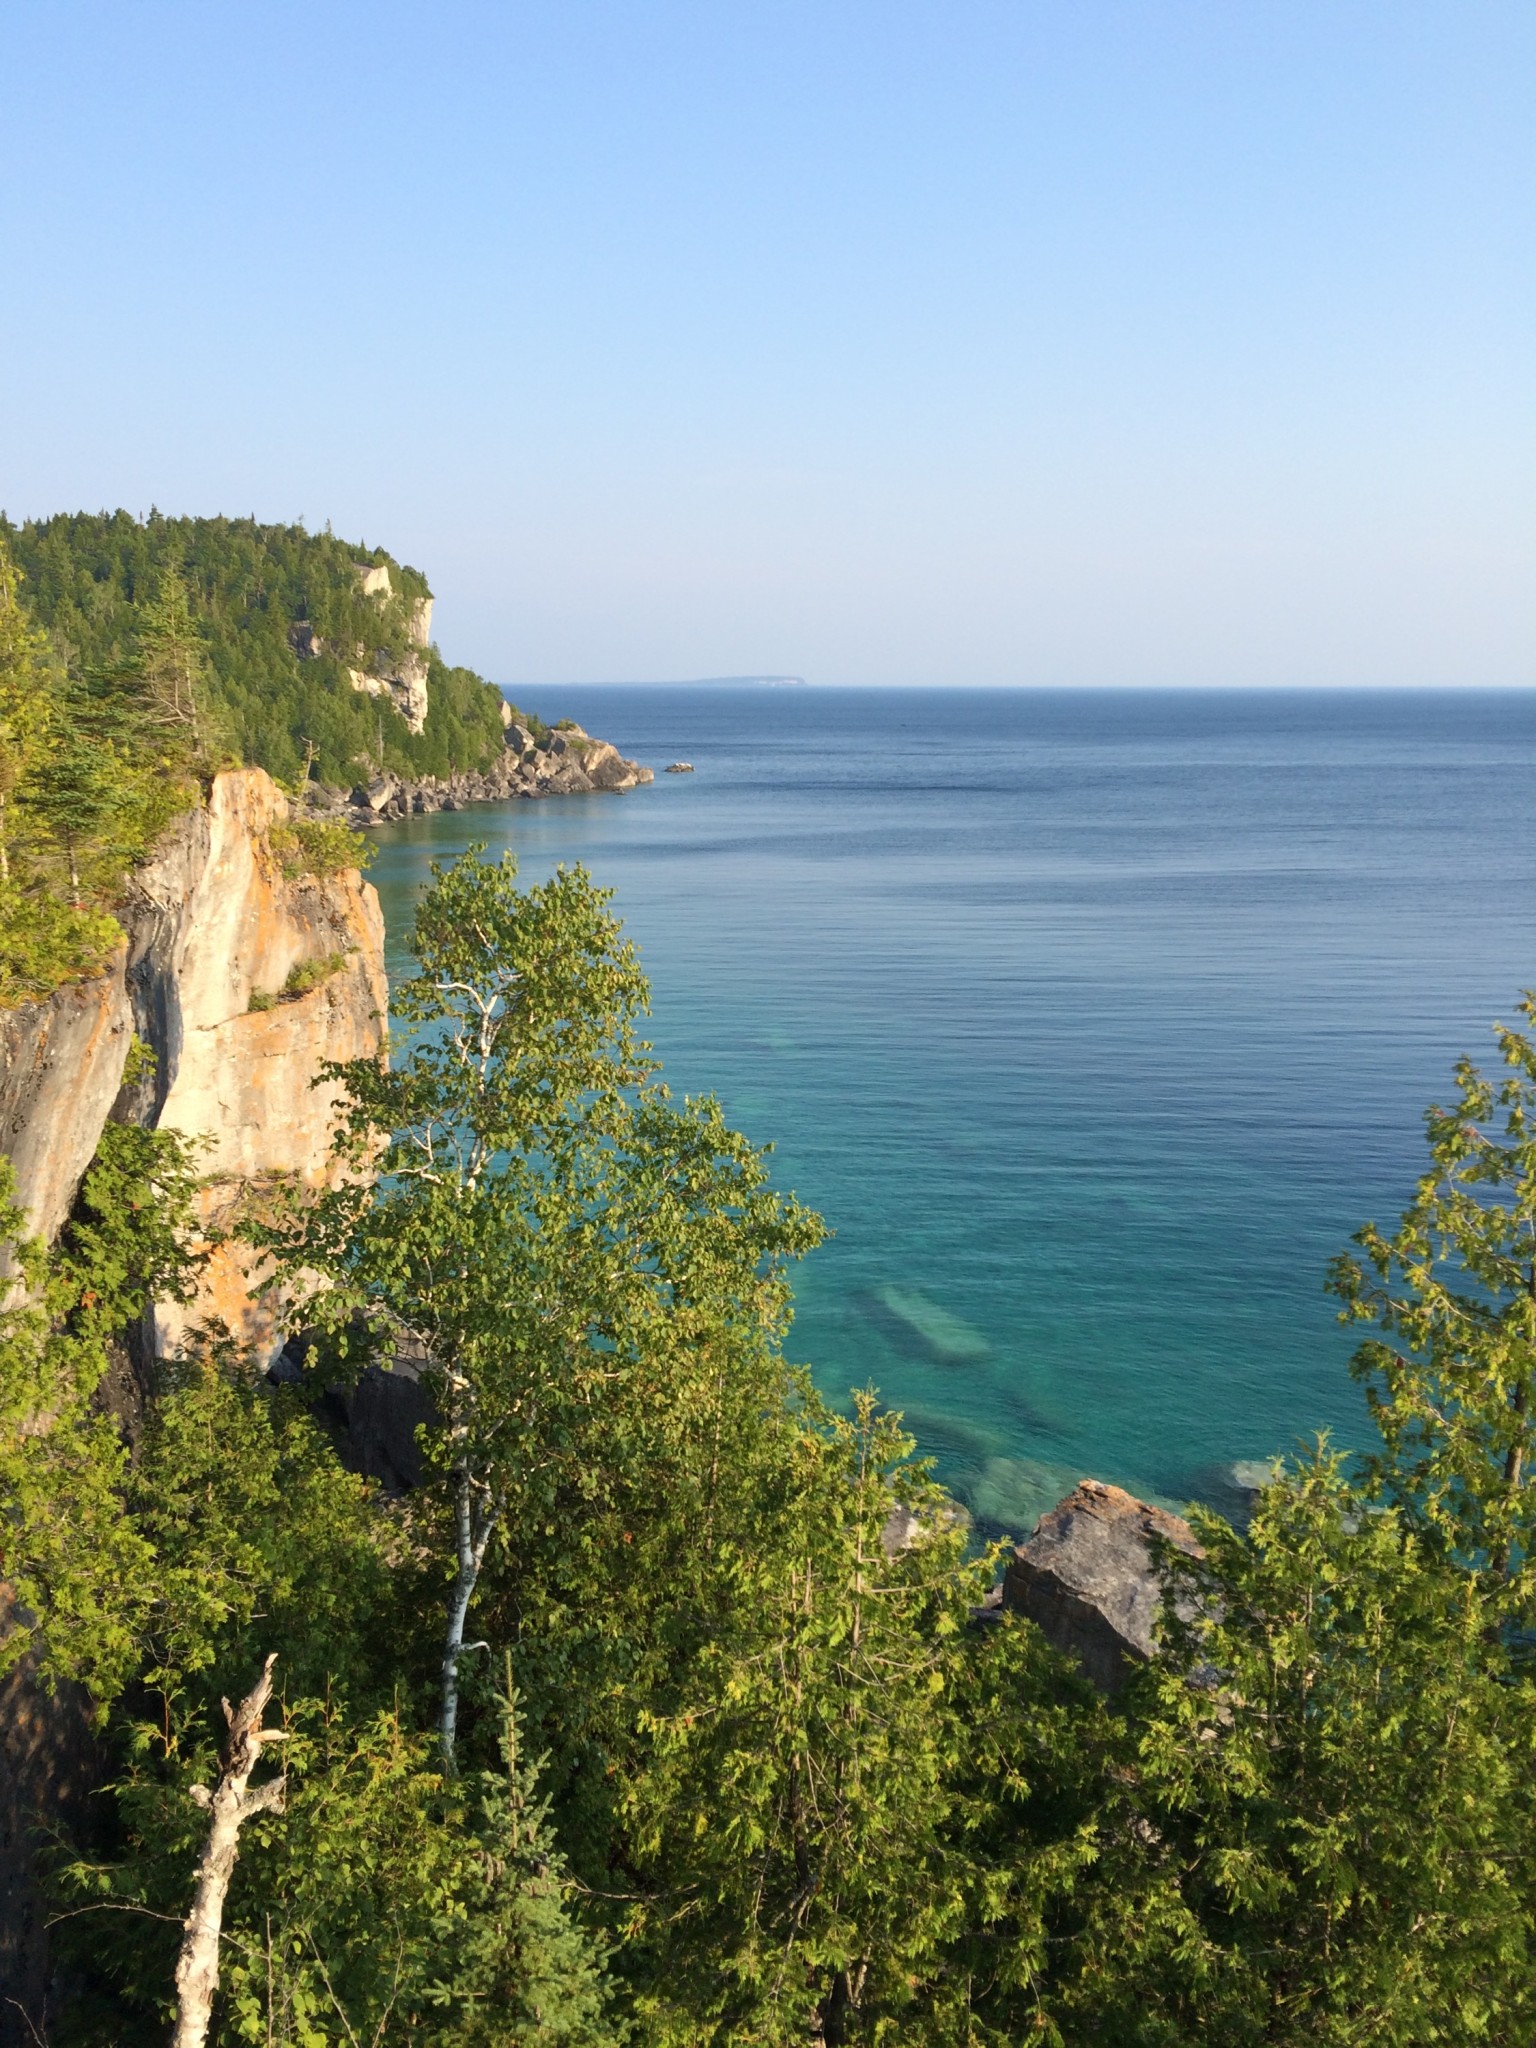 Bruce Trail to Stormhaven in Bruce Peninsula National Park